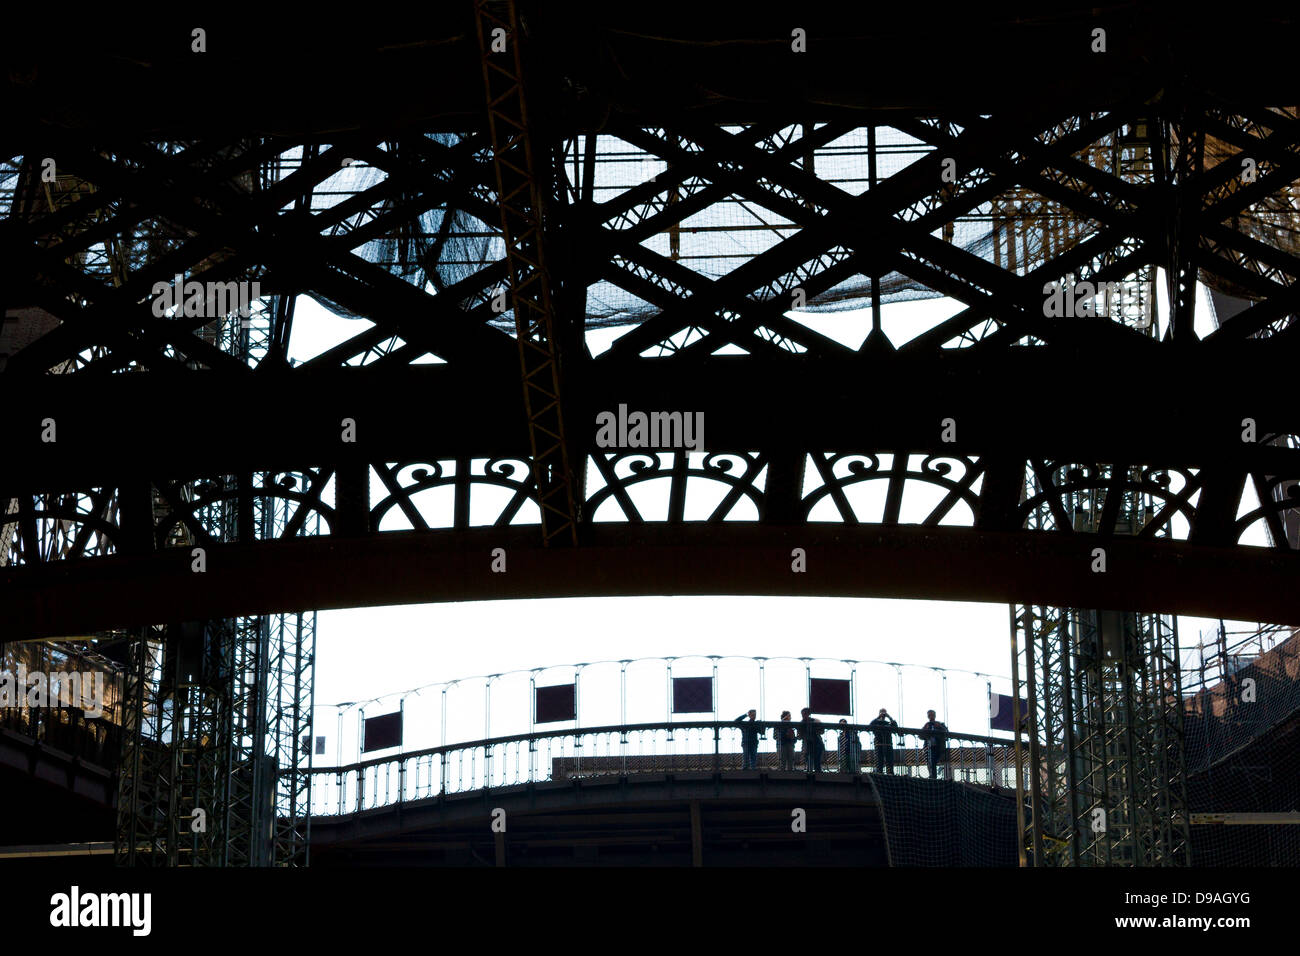 Silhouette of people looking out from first level platform of Eiffel Tower surrounded by decorative ironwork Stock Photo